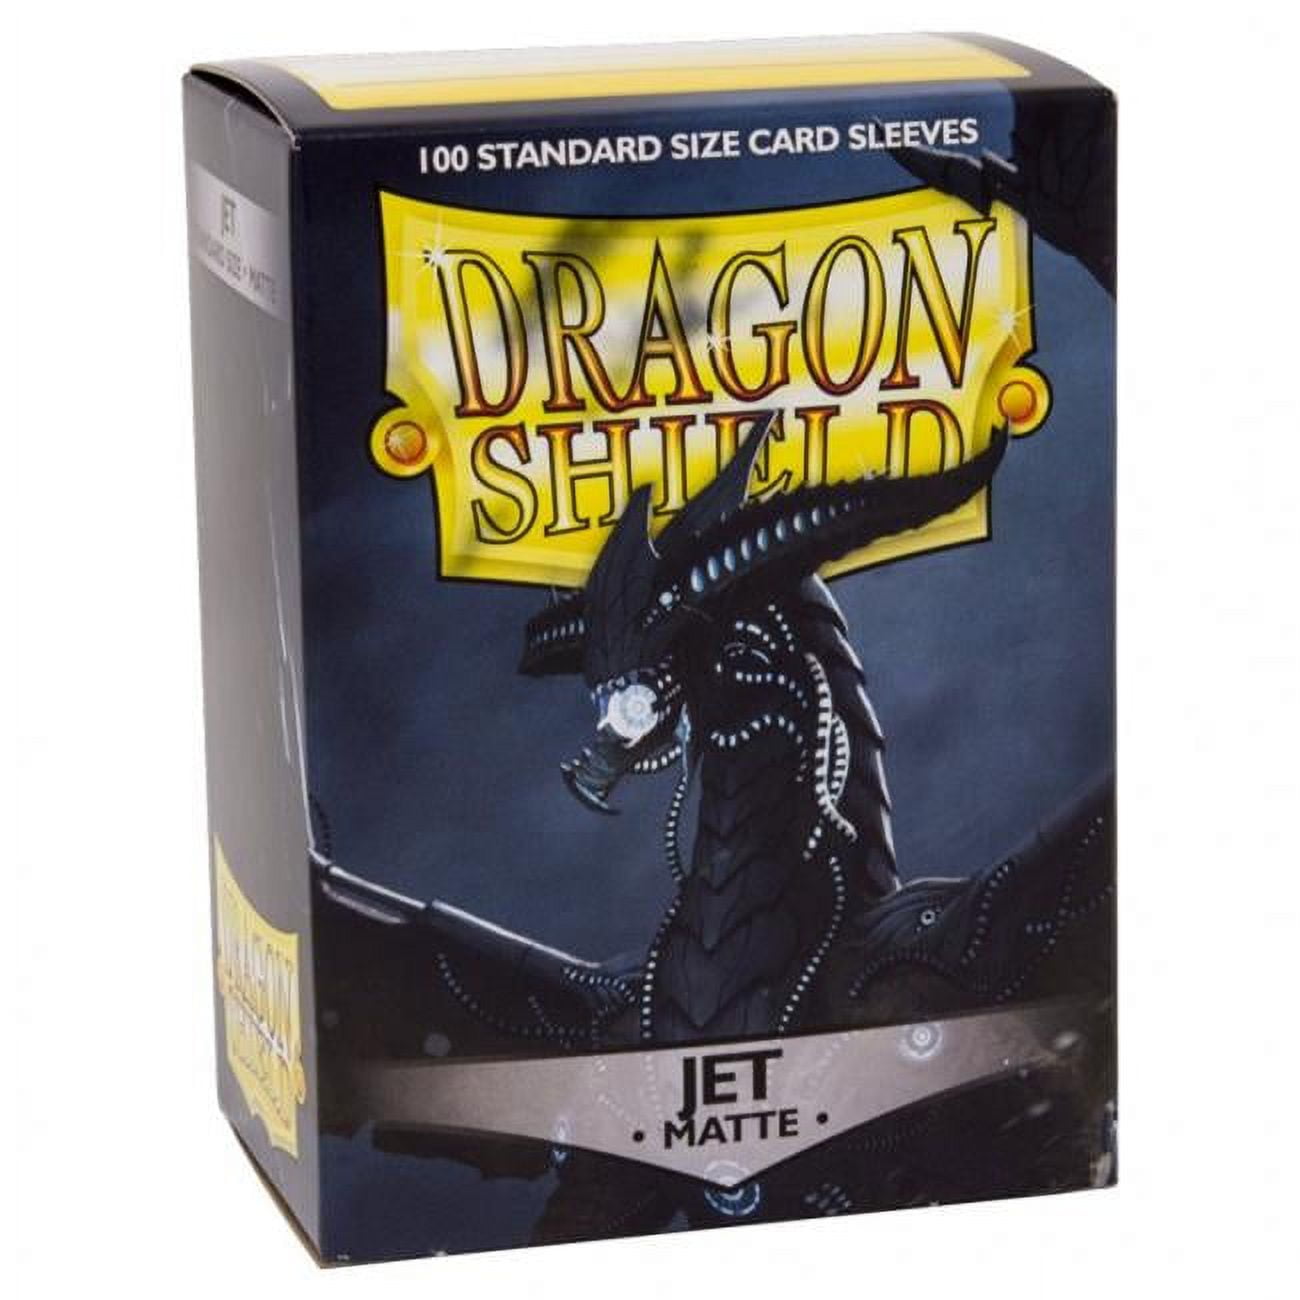 Atm11024 Dp Dragon Shield Card Sleeves, Matte Jet - 100 Count